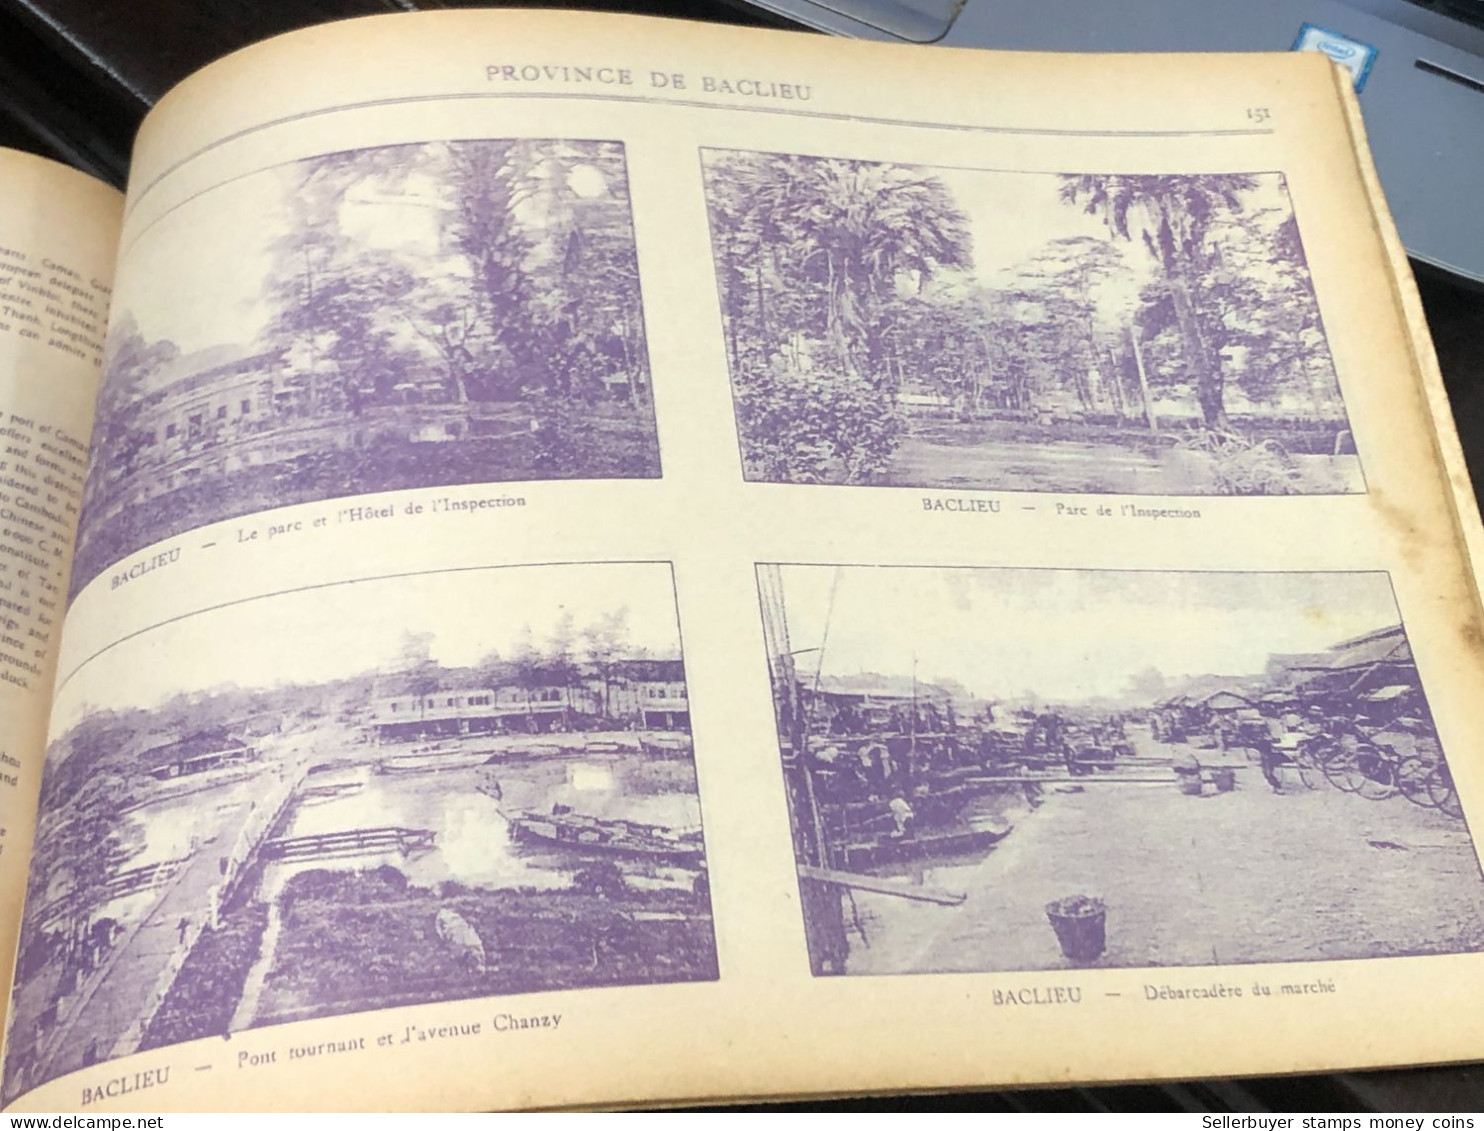 French book printed with 21 provinces and cities with images of southern Vietnam.French colonial period of Vietnam(LA CO